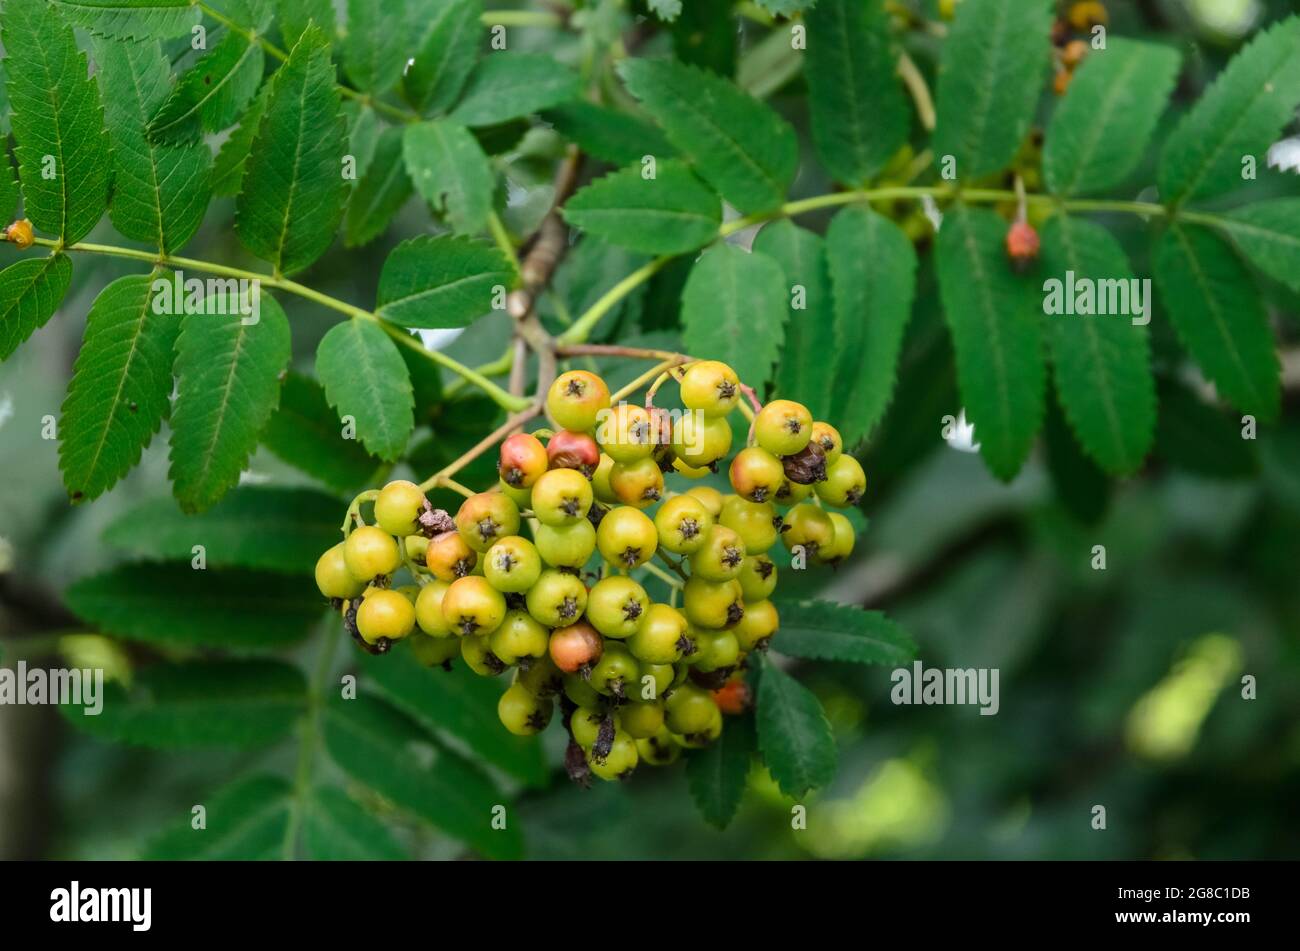 Sorbus aucuparia, known as rowan or mountain-ash shrub with young unripe green berries in a forest Stock Photo